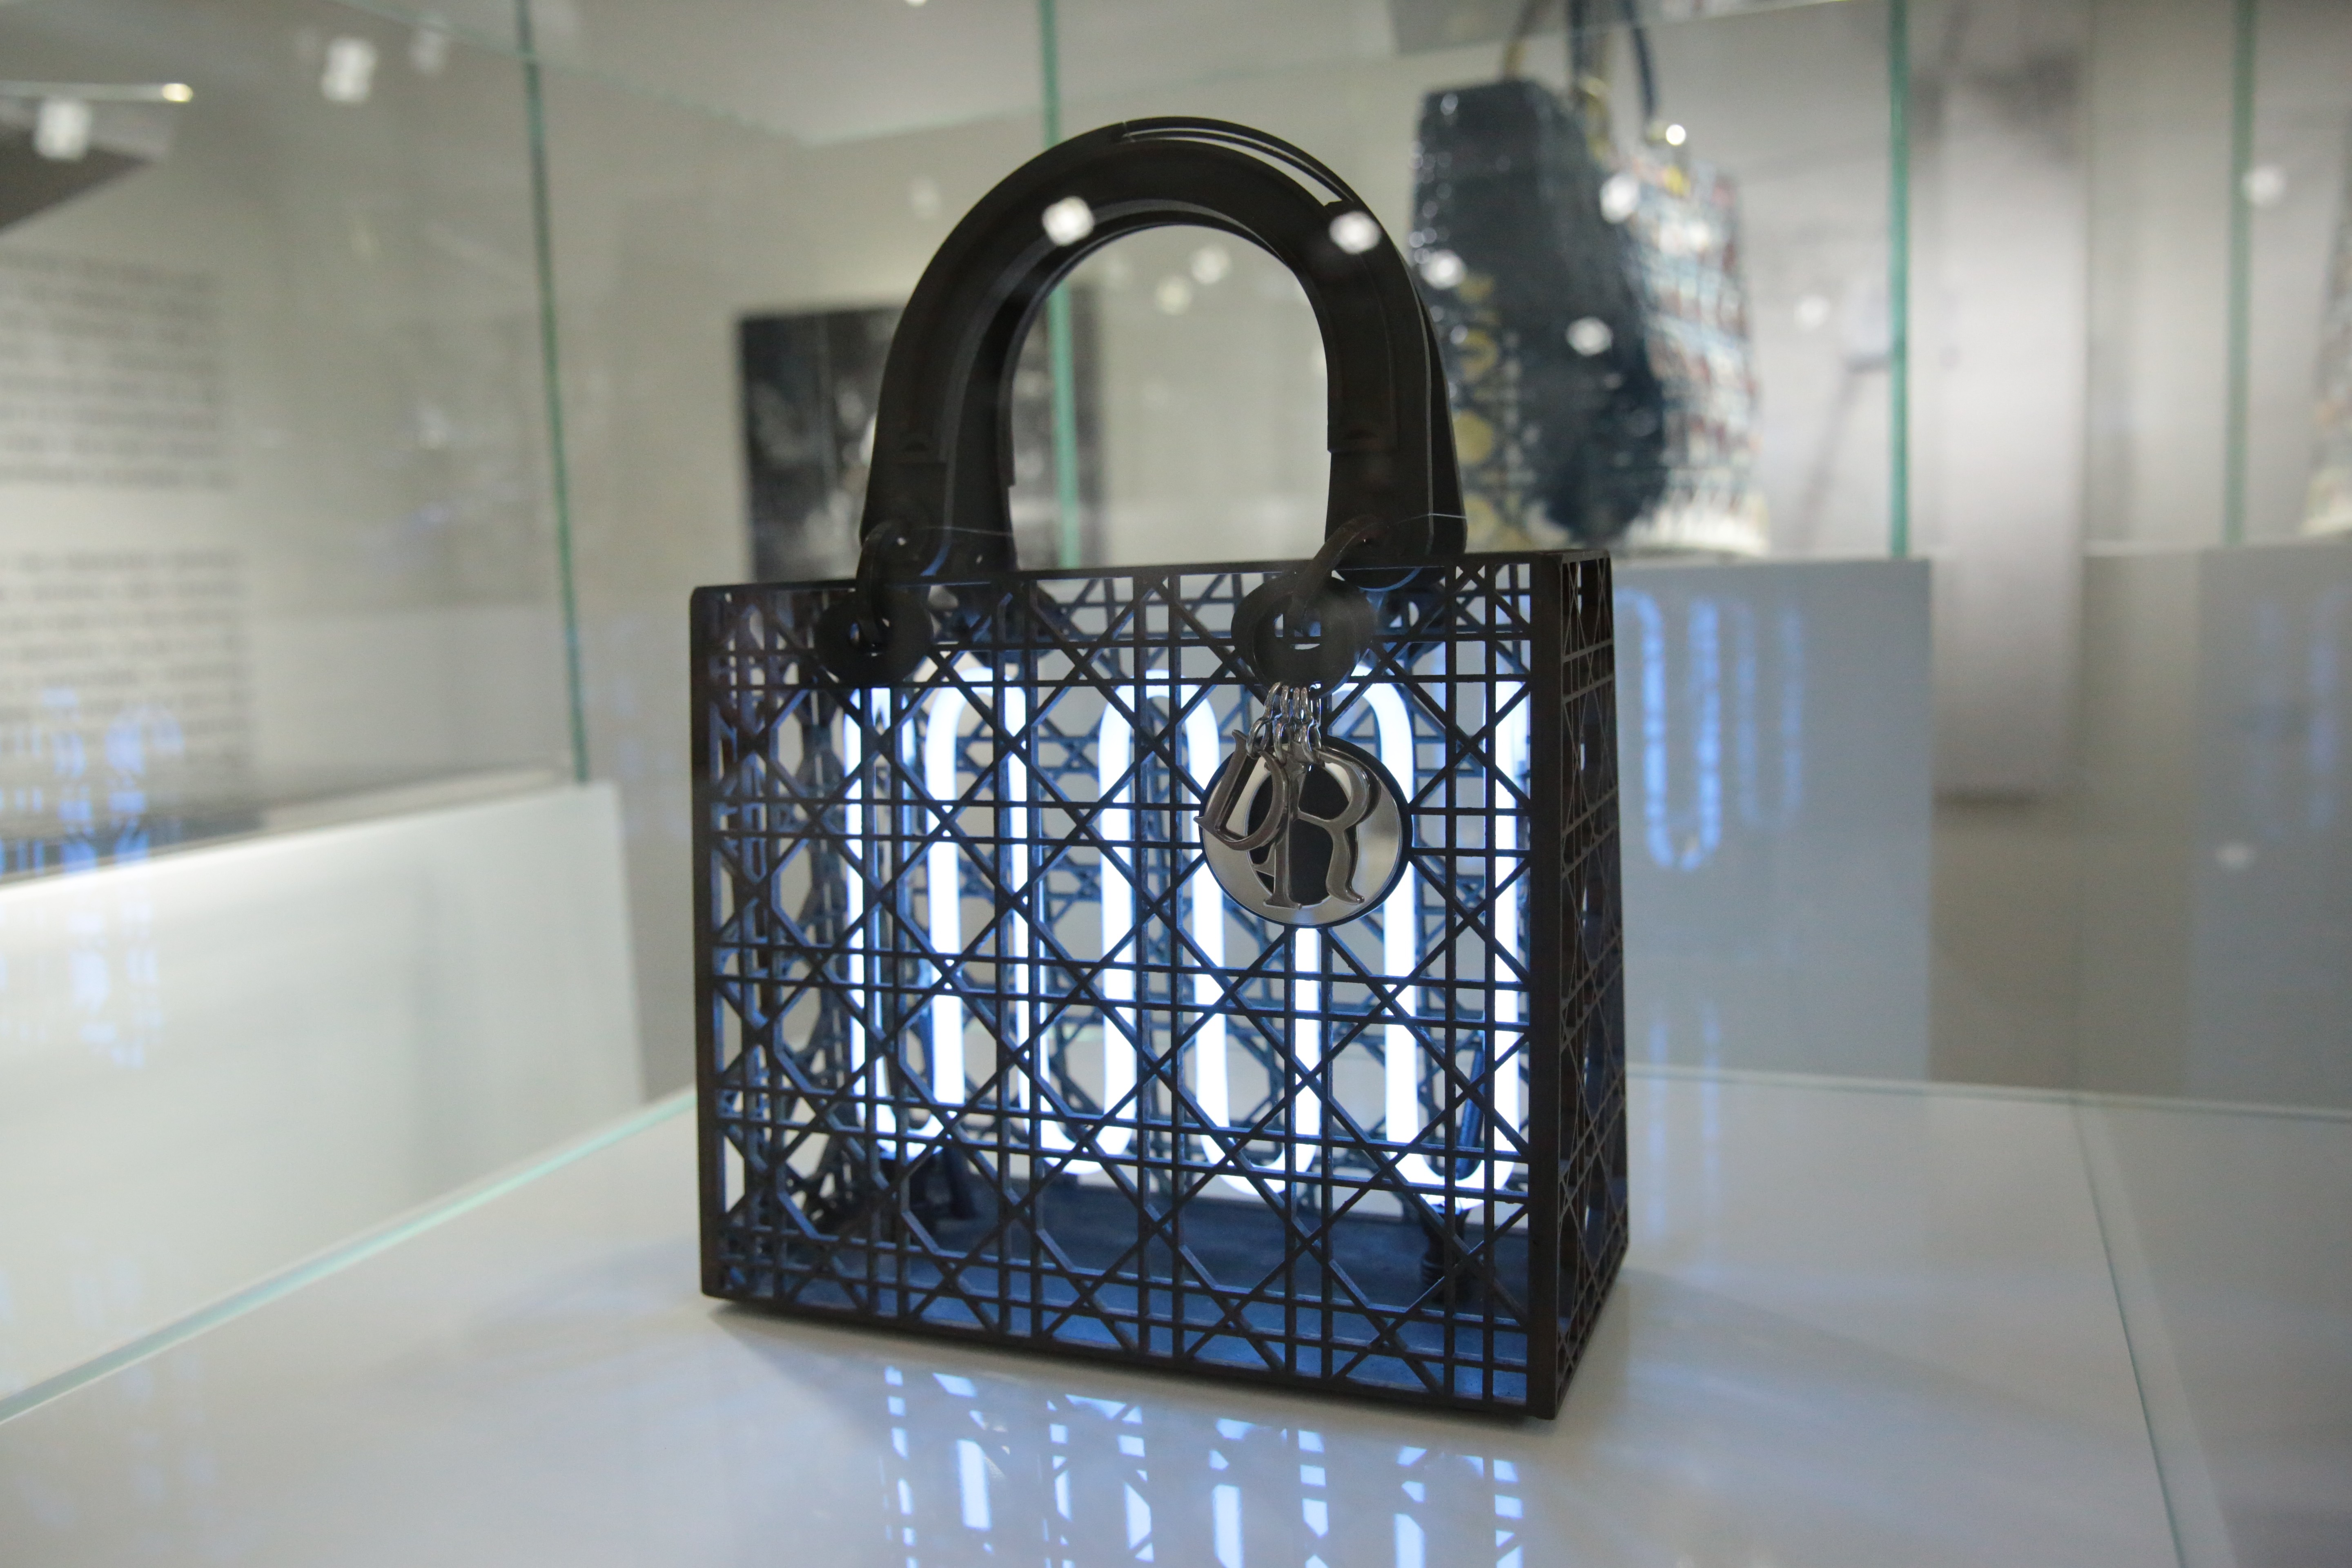 Christian Dior Lady Cube Pouch